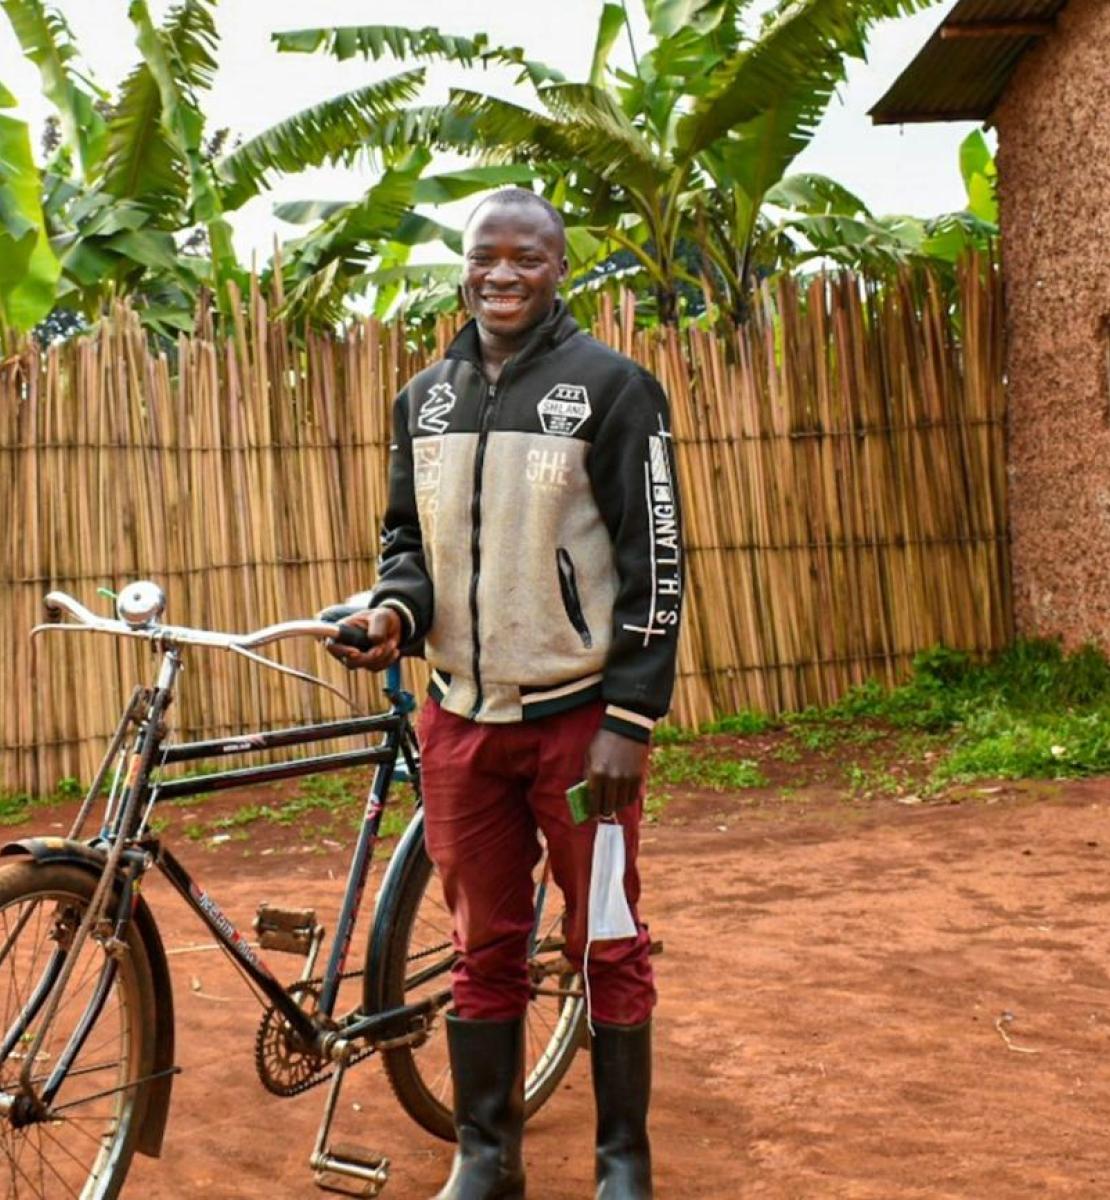 A man dressed in red pants stands by his bicycle outside a modest house lined with reeds and palm trees and smiles at the camera